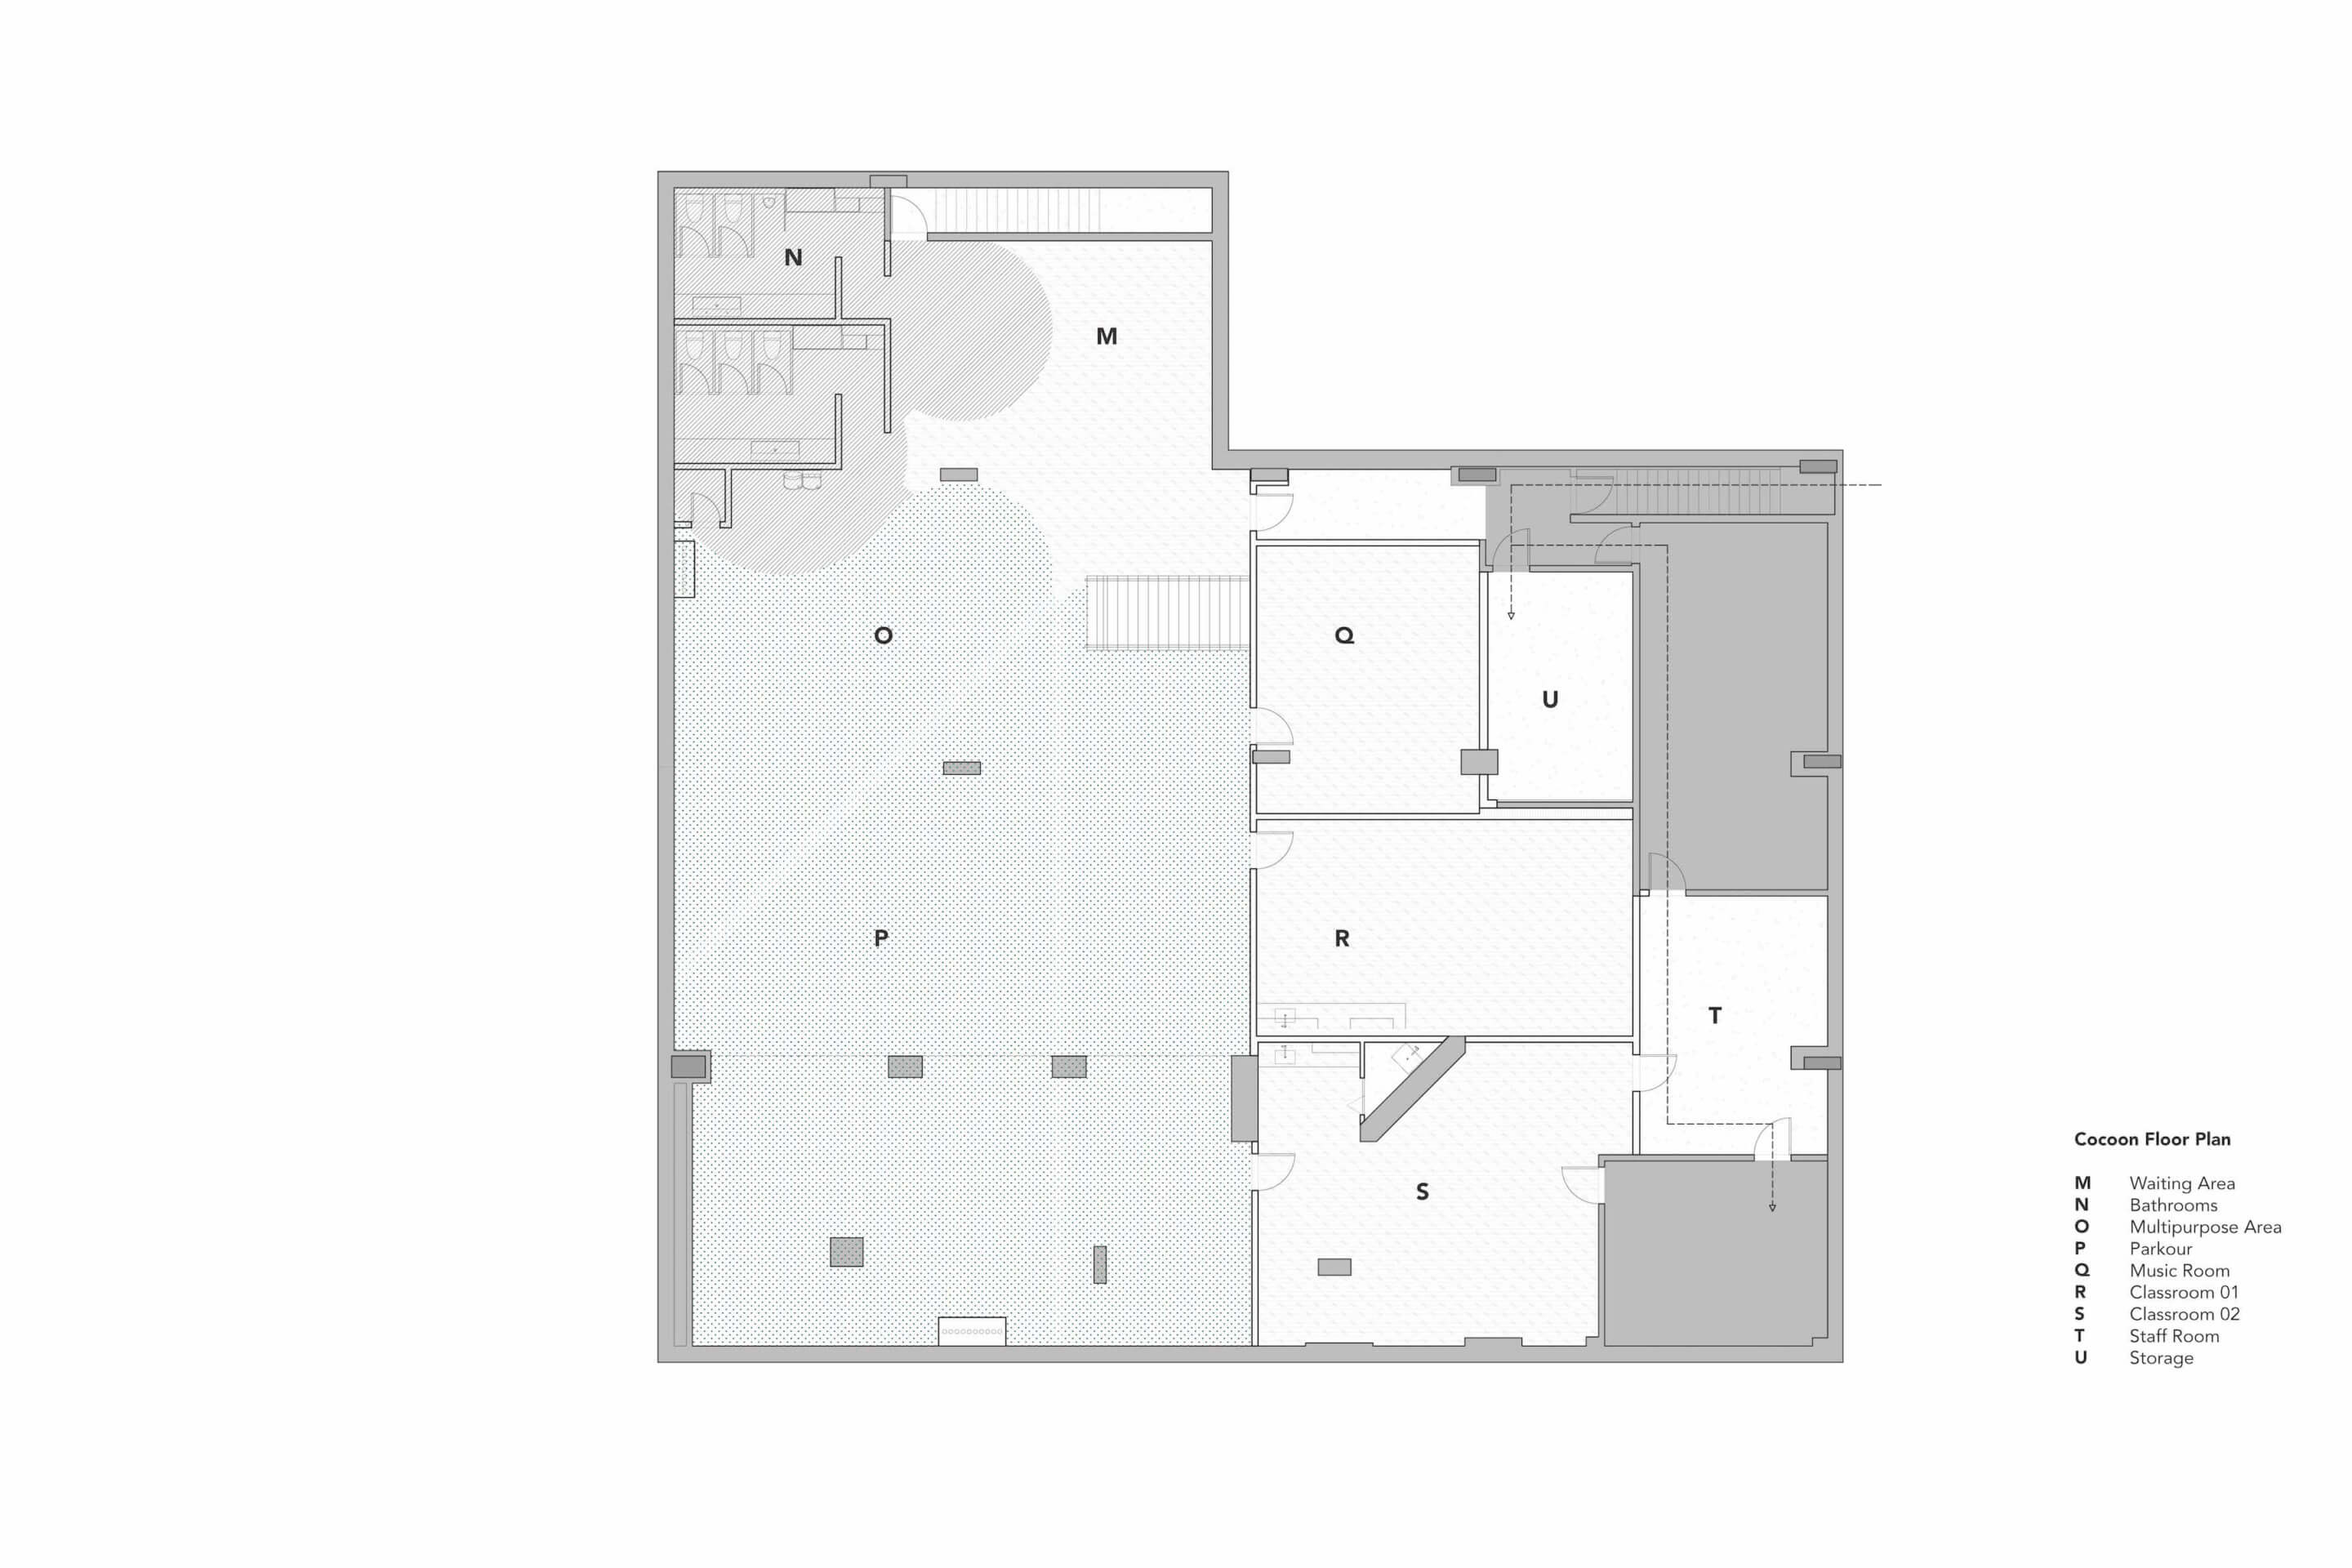 floor plan of an L-shaped basement with classrooms and bathrooms